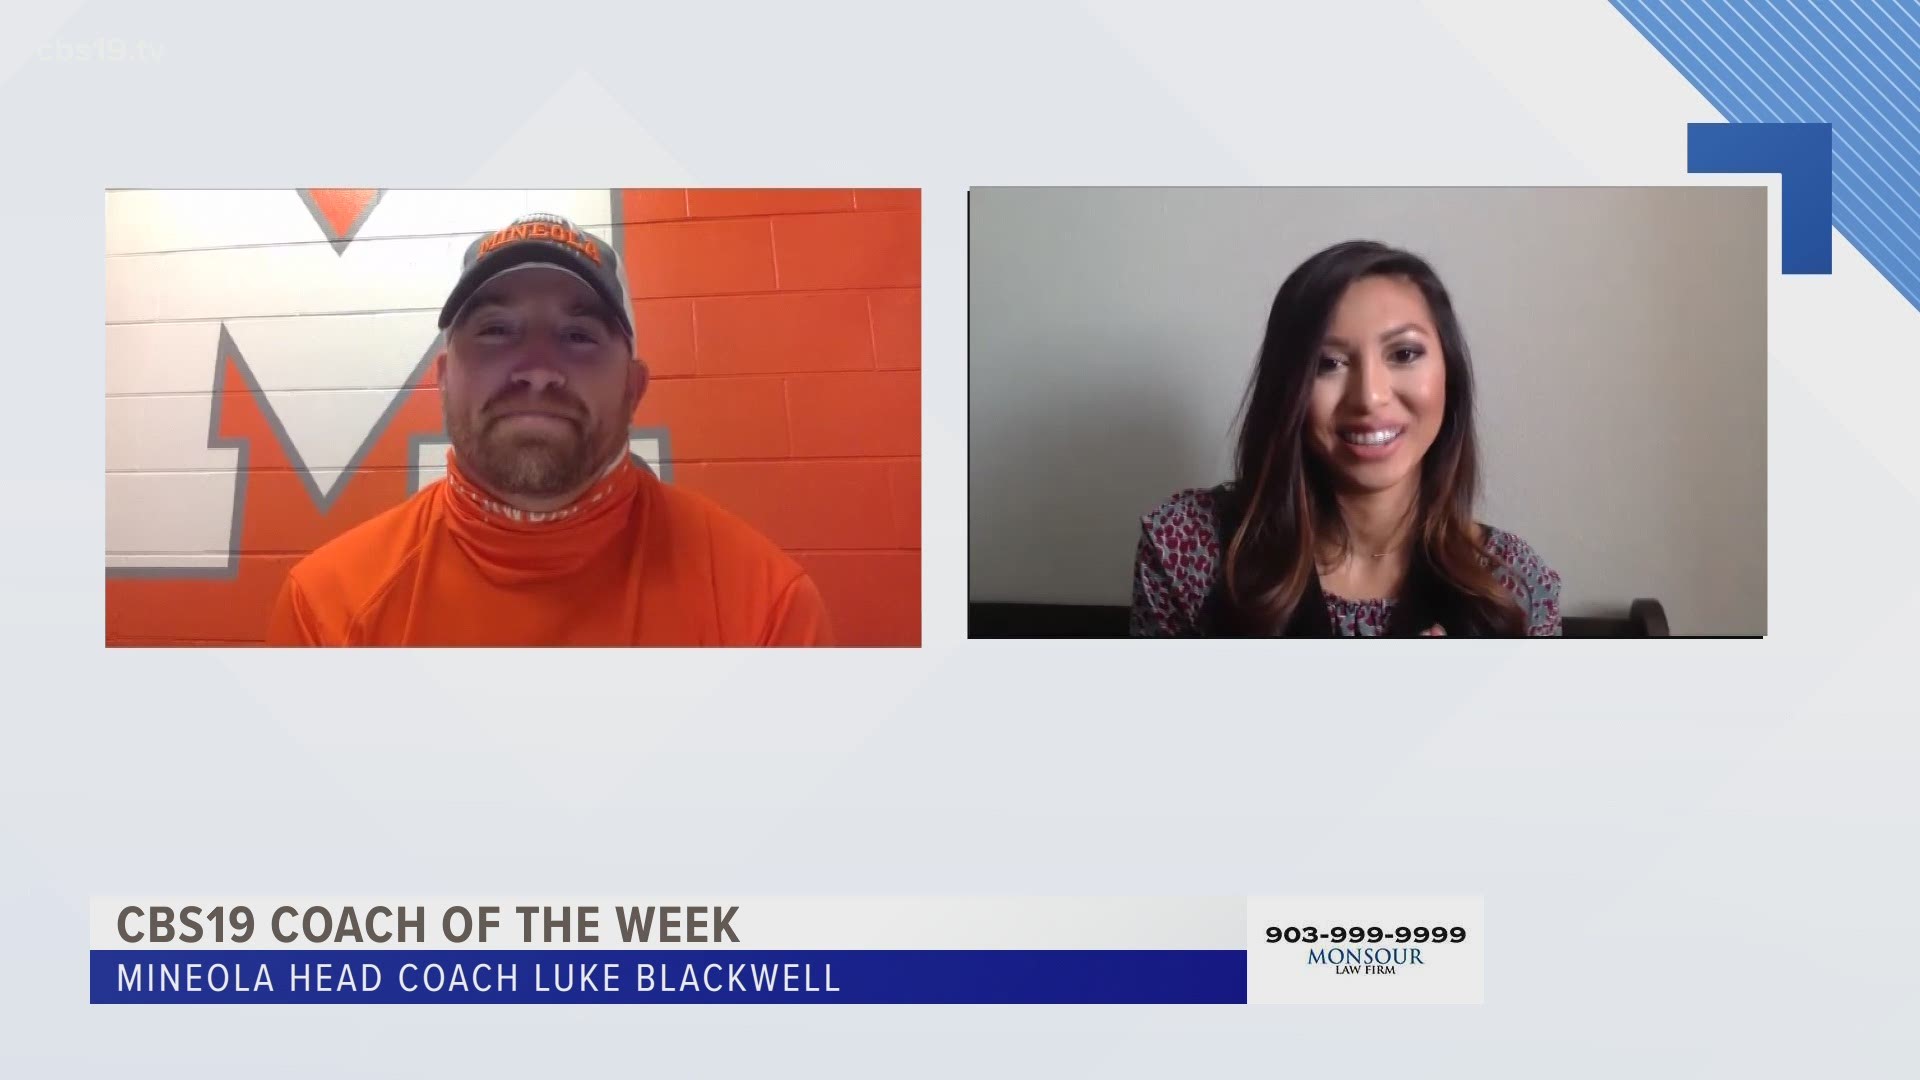 Get to know our Week 7 CBS19 Coach of the Week more as he #Takes10 with Tina Nguyen!